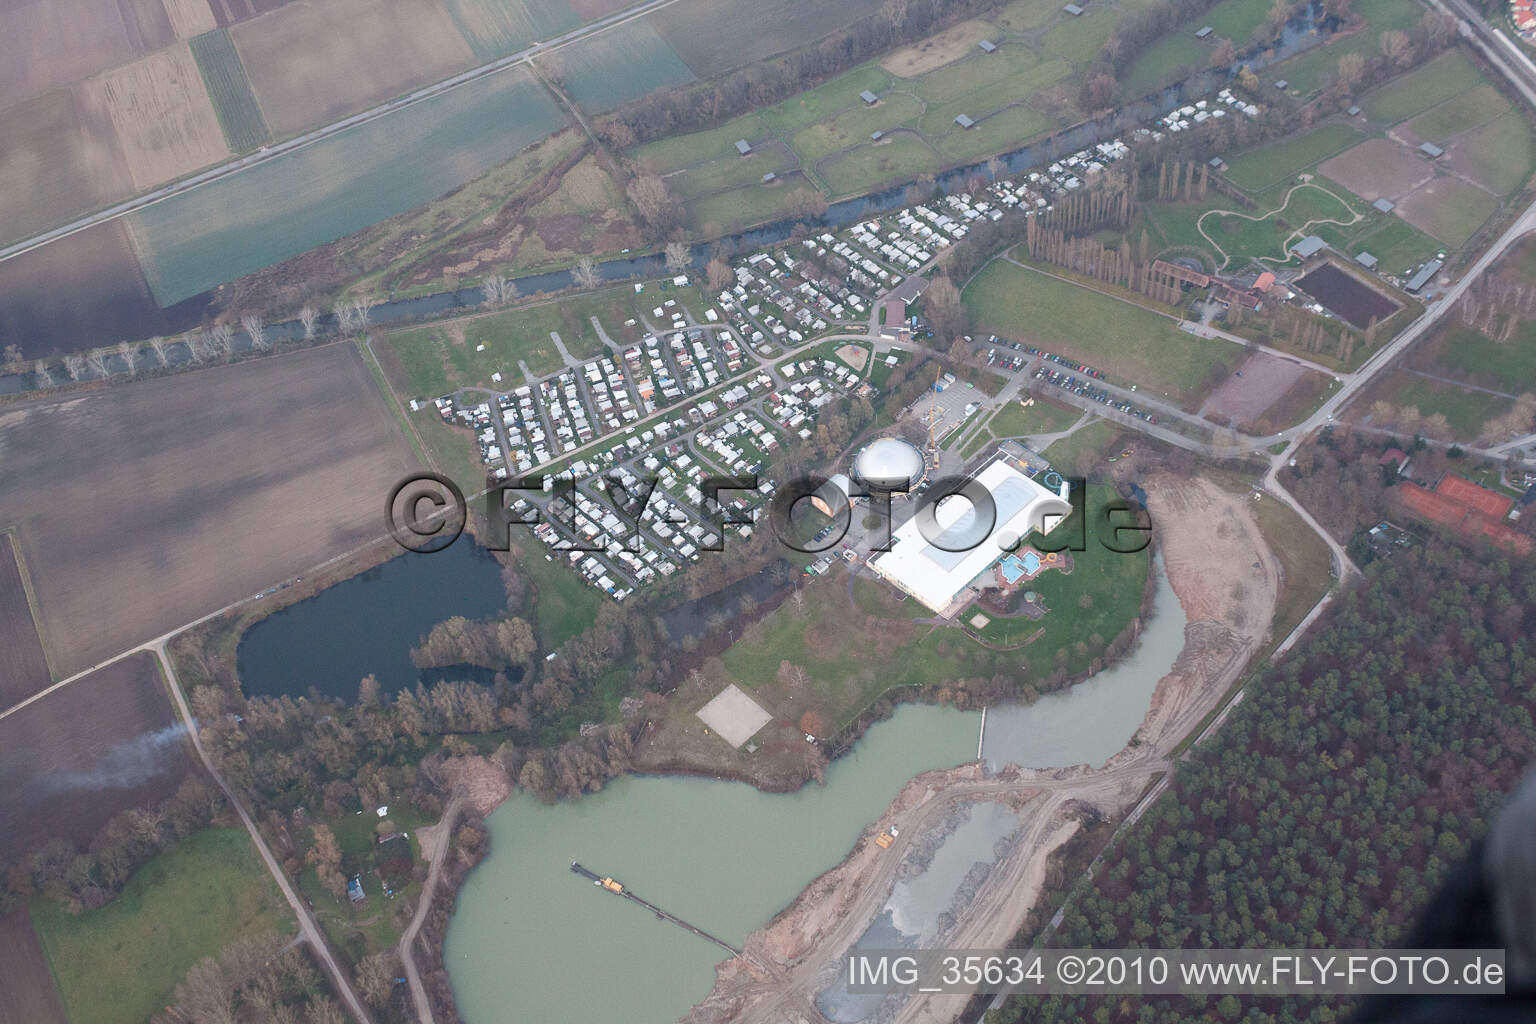 Aerial view of Campsite in Rülzheim in the state Rhineland-Palatinate, Germany